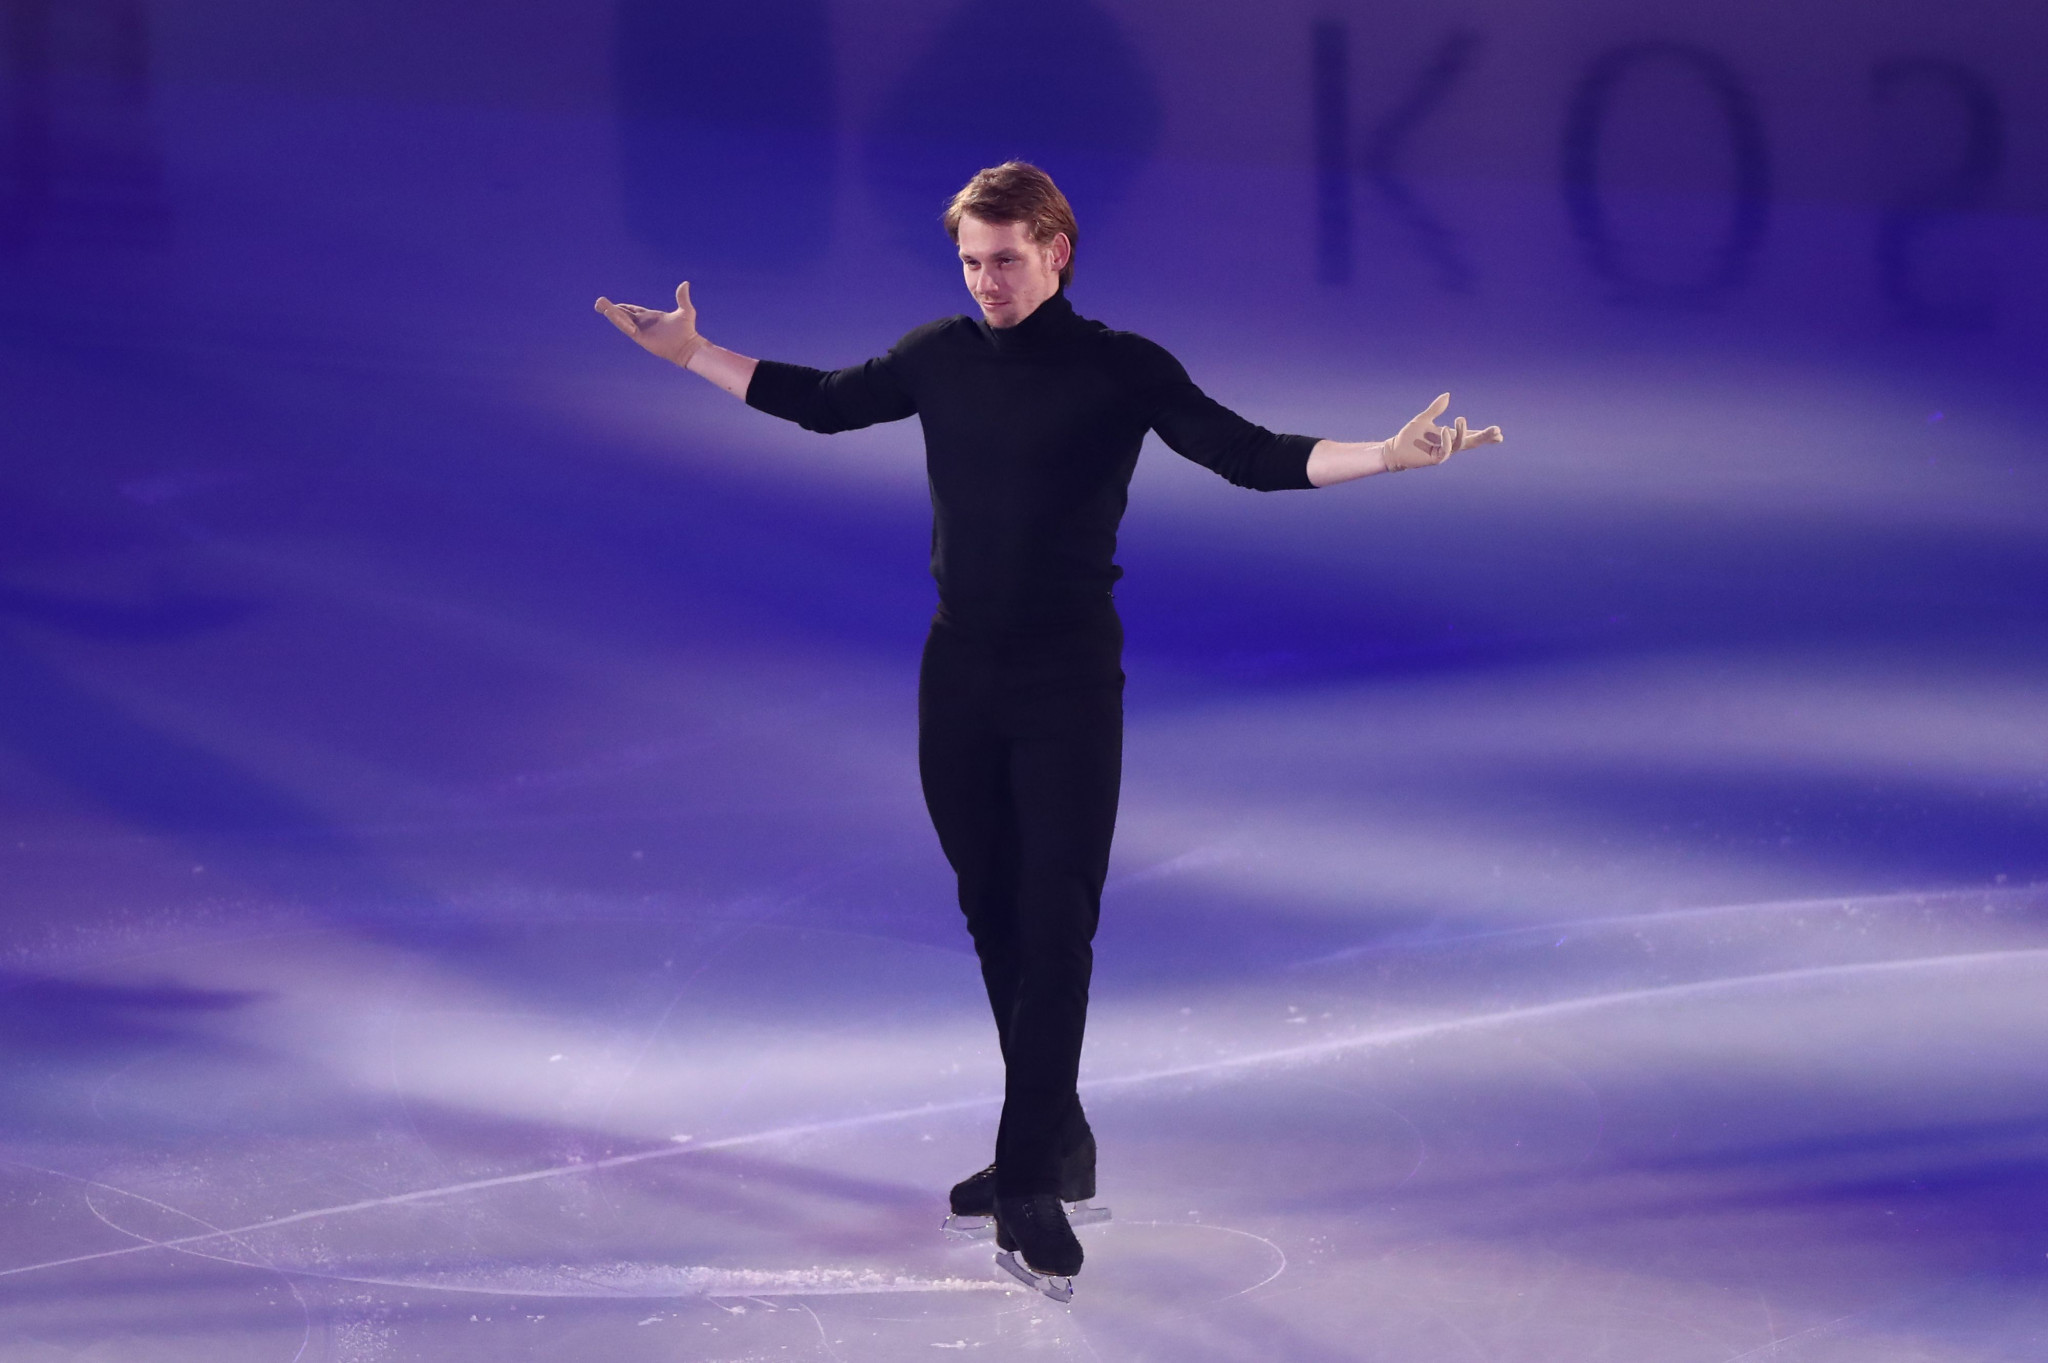 Sergei Voronov won two medals at European Championships in his career ©Getty Images